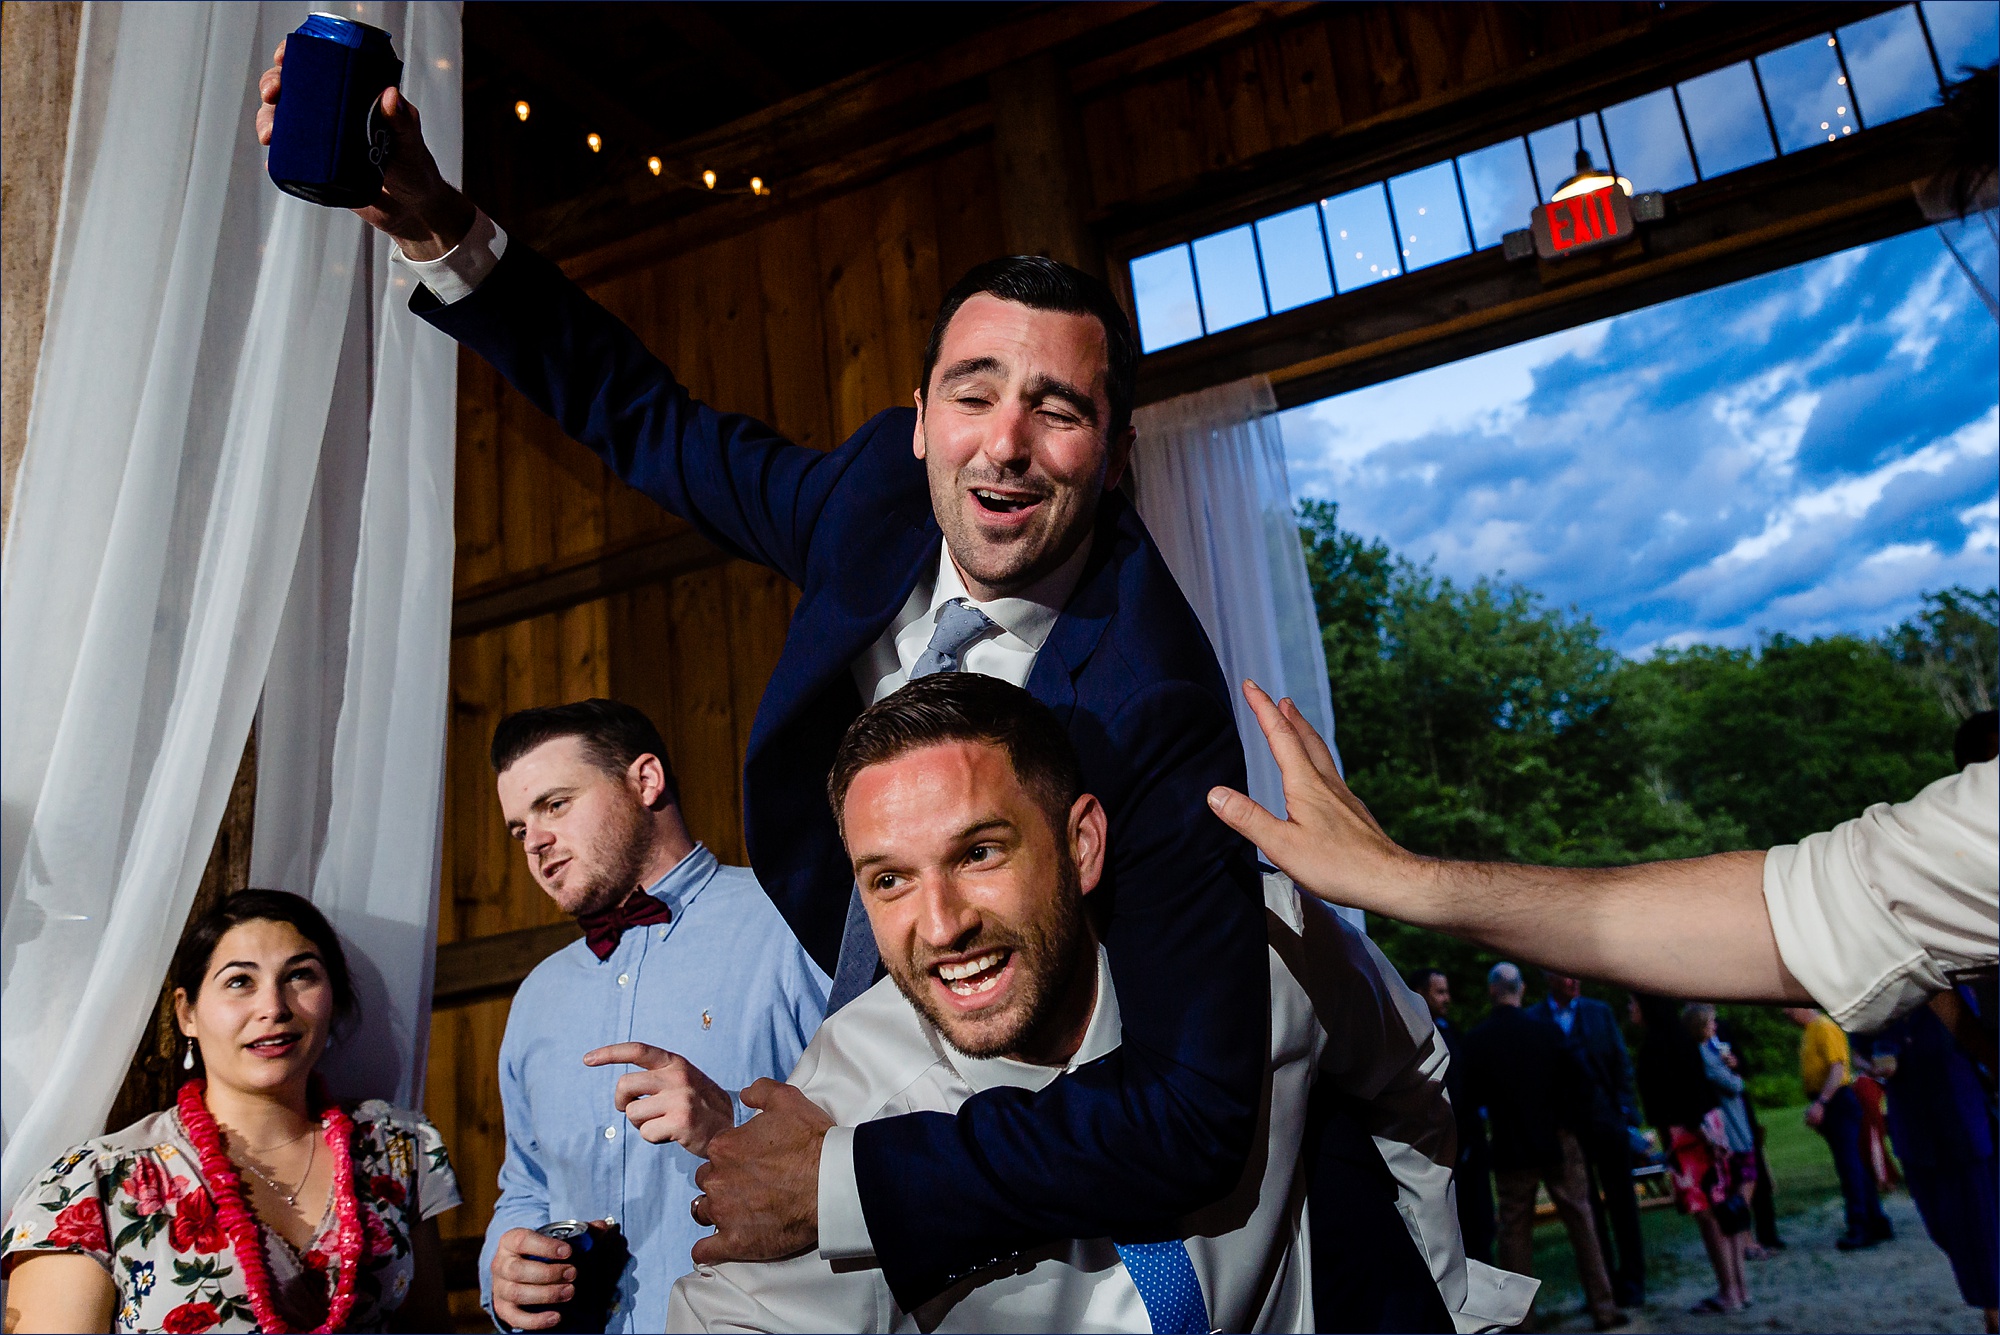 The groom plays chicken on his best friend's back at the wedding reception at Kitz Farm in NH